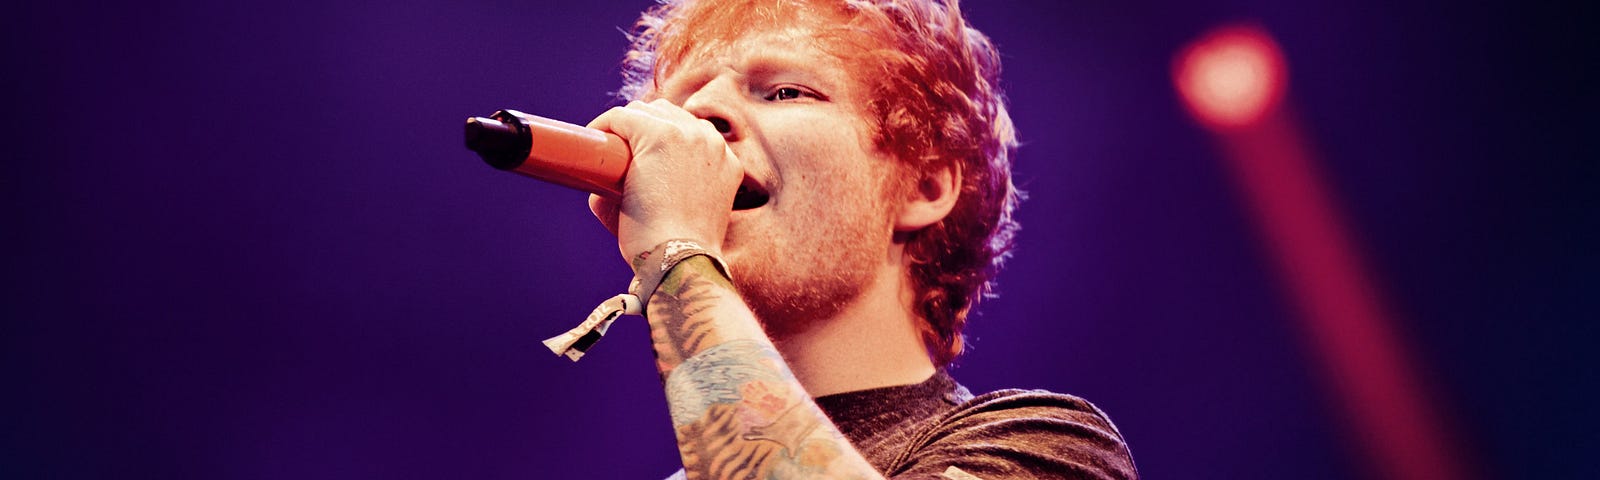 These Things Are You Should Learn From Ed Sheeran- Ed Sheeran life lessons